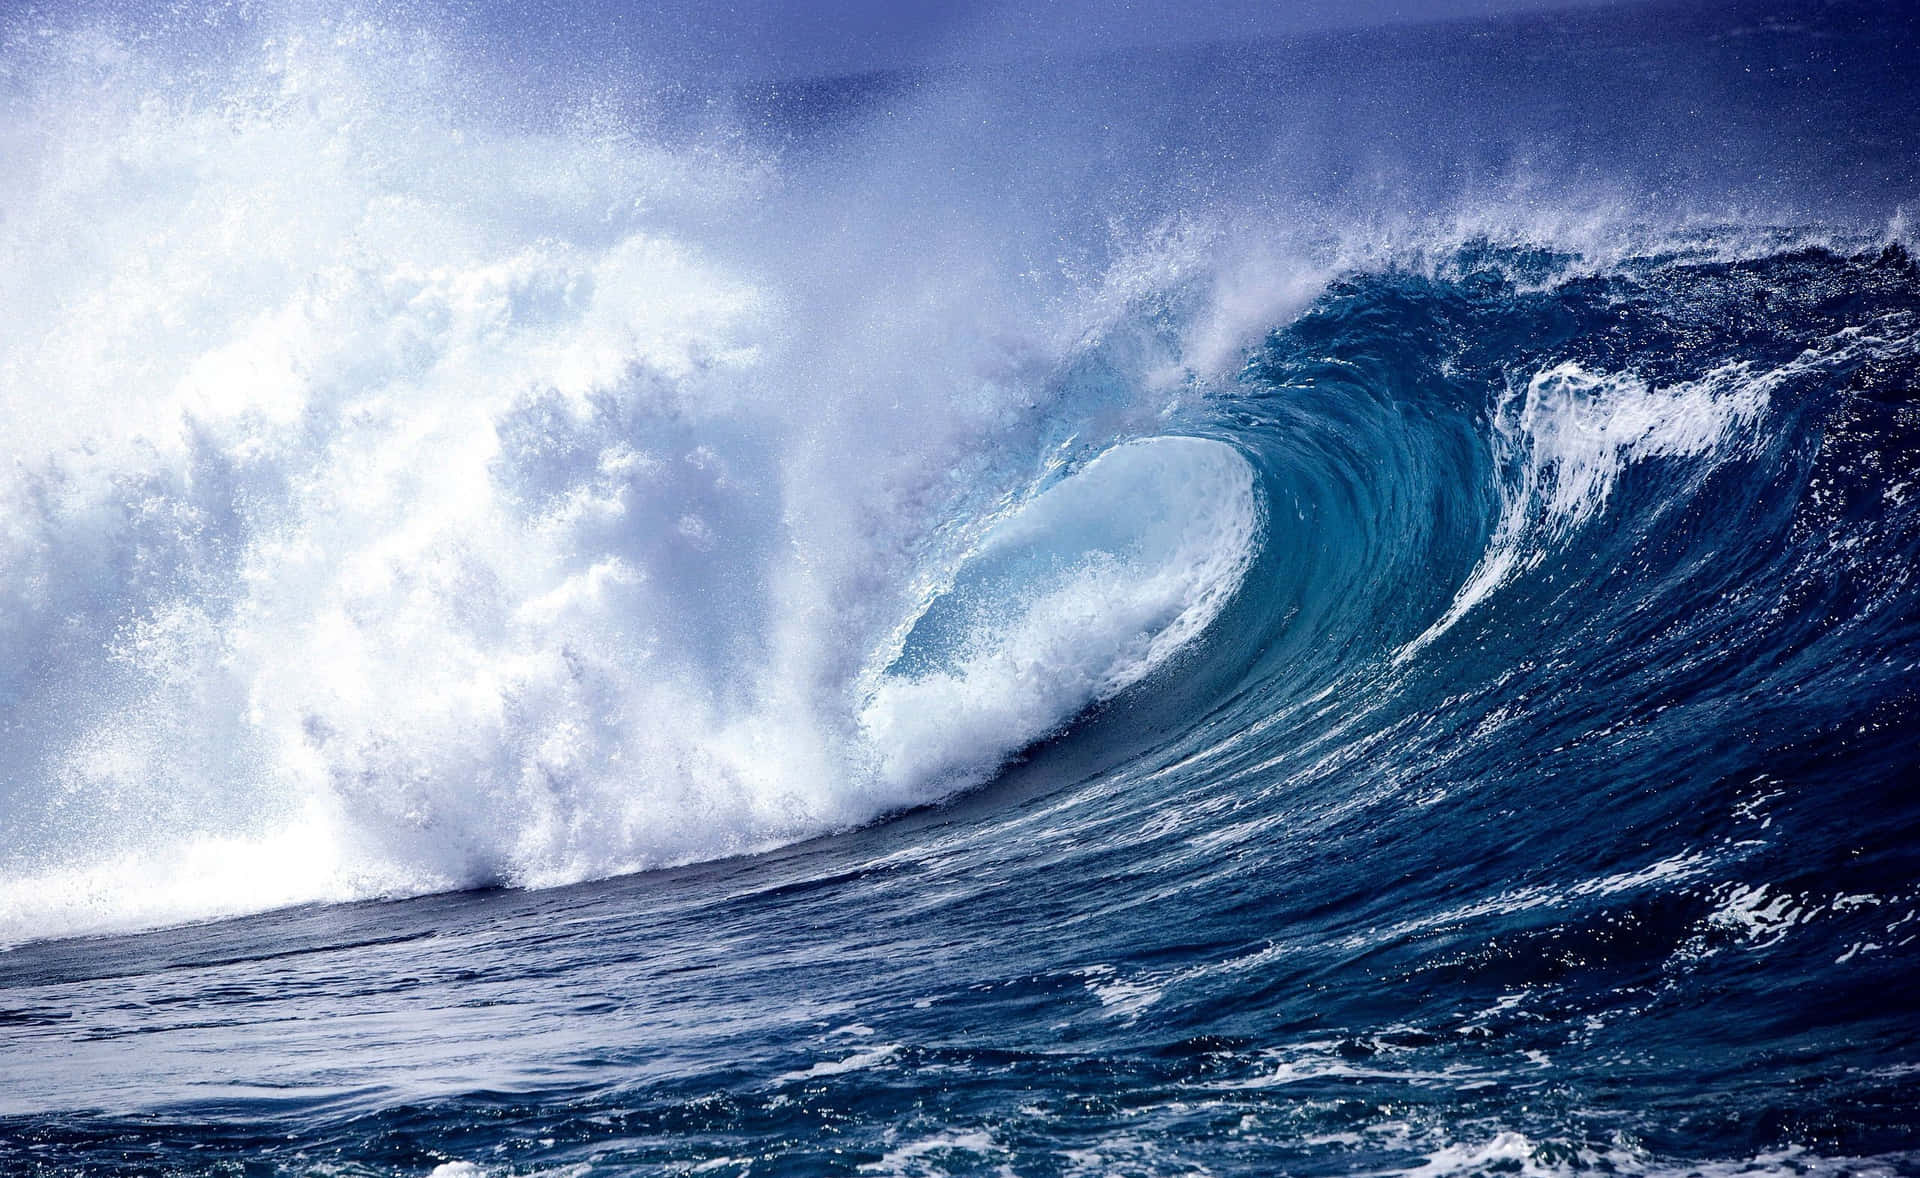 Caption: Majestic Ocean Waves in High Resolution